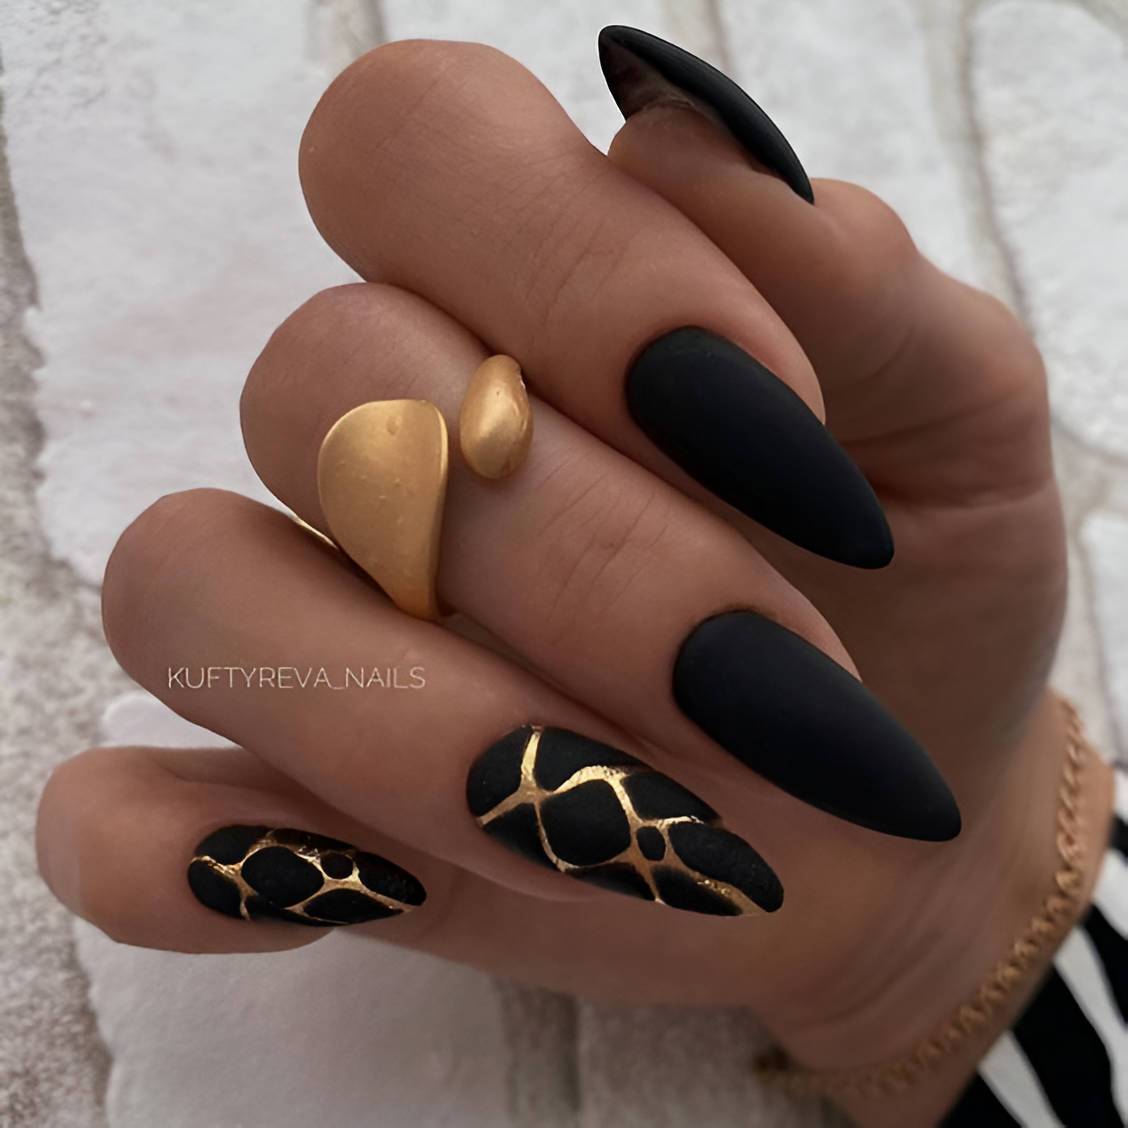 30 Classy Black Nail Designs To Glam You Up - 211